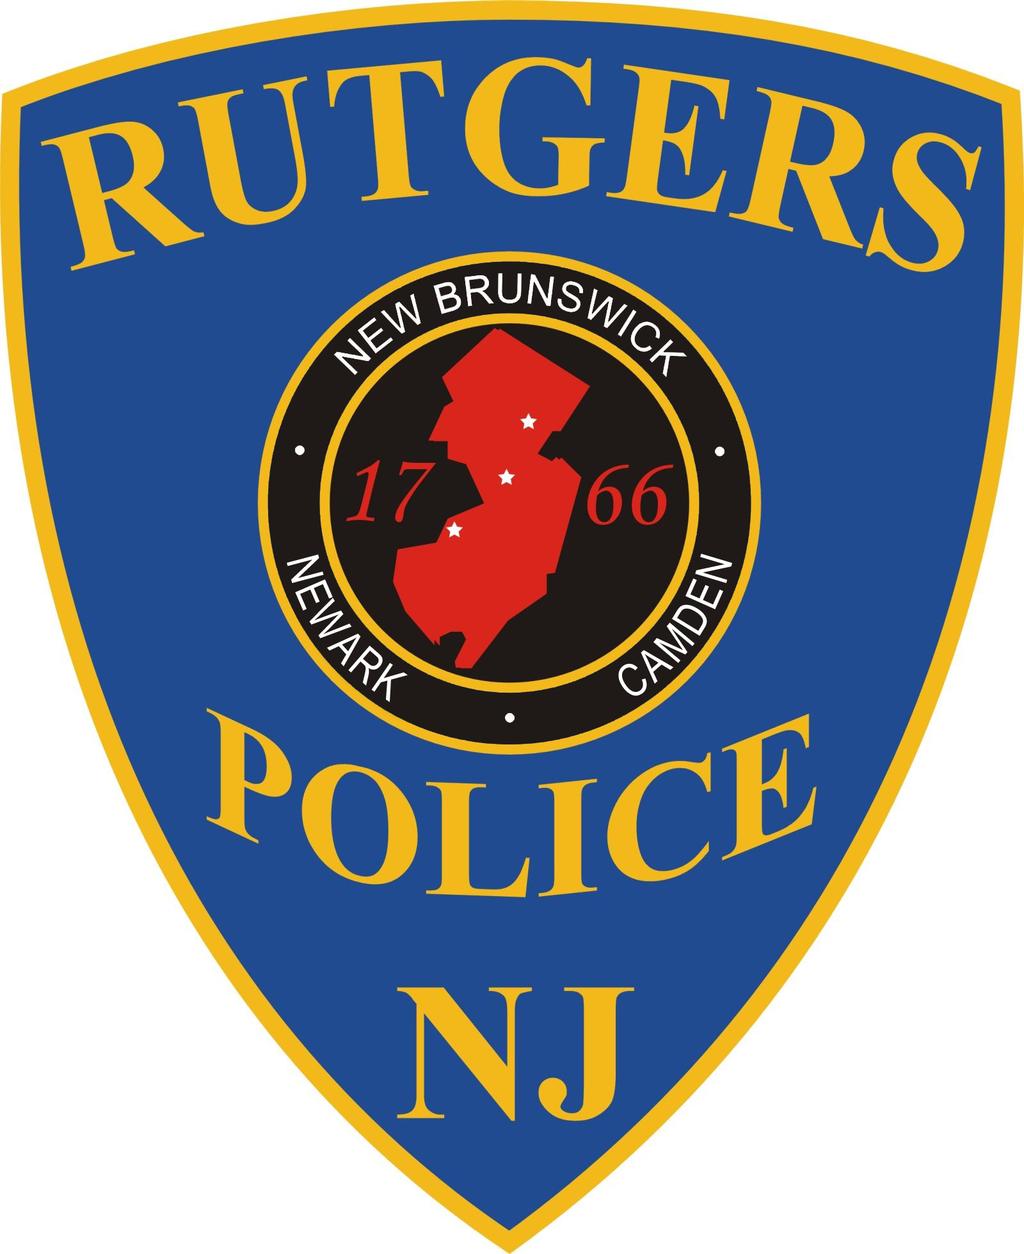 Daily Crime and Fire Safety Log Rutgers PD Newark Saturday 01 September 2018 Sunday 30 September 2018 Incident 182000698 Simple Assault 09/01/18 0032Hrs 09/01/18 0020Hrs 182000700 Simple Assault